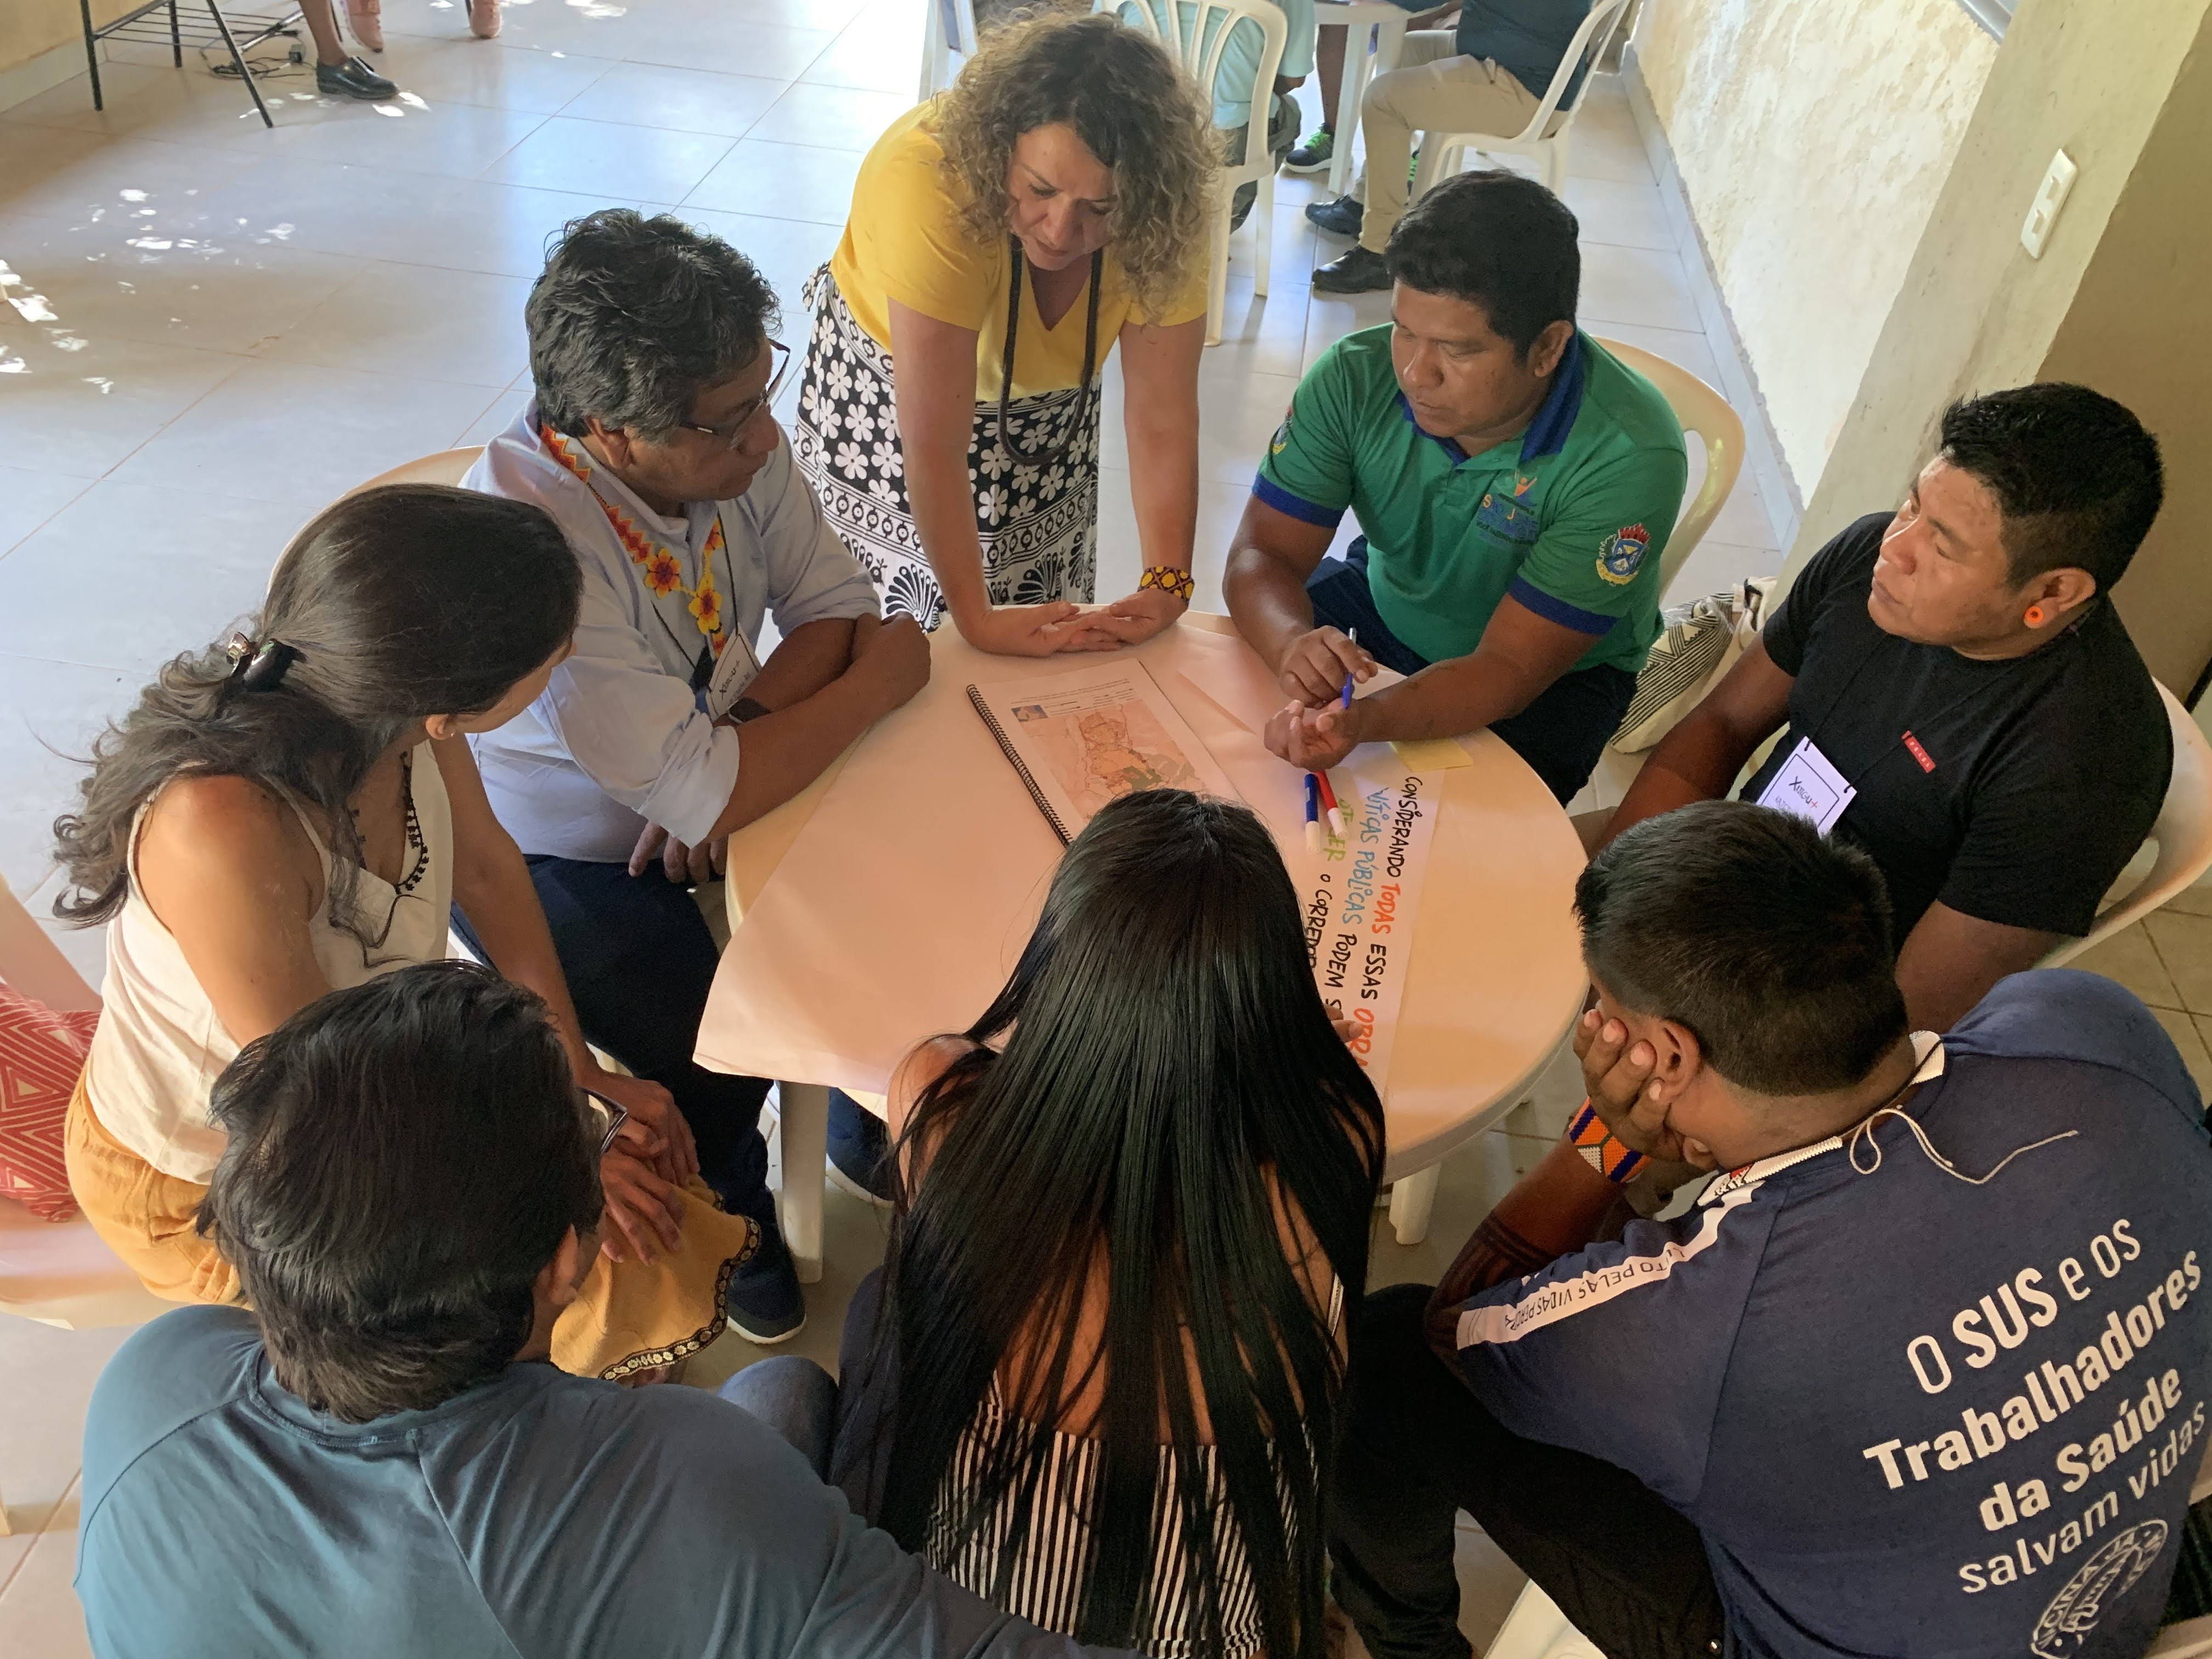 In Brasília, a group discusses the impact of works on the Xingu Sociobiodiversity Corridor | Credit: MIRÁ/Organizational Design